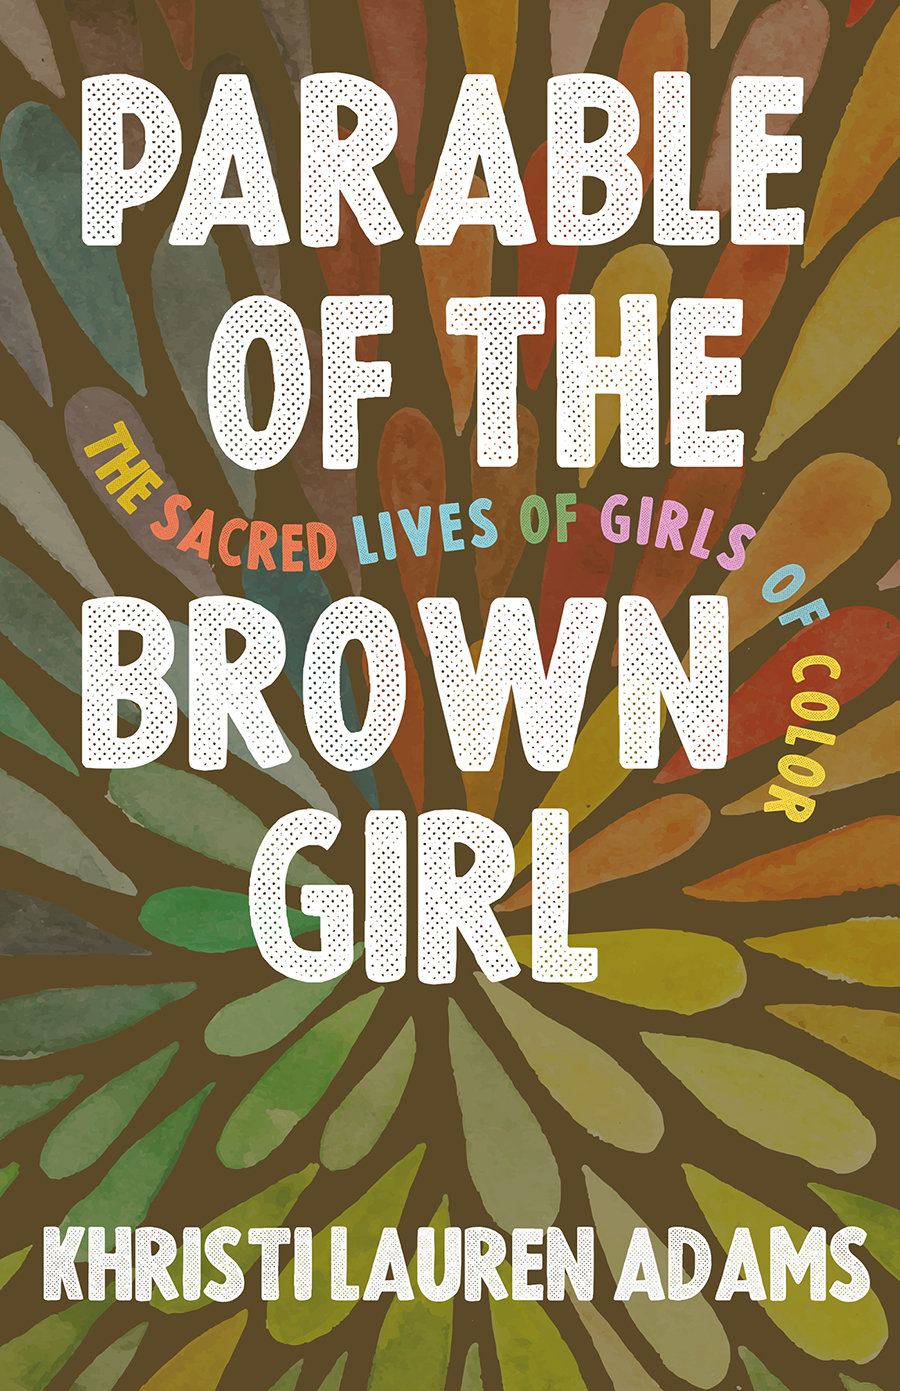 Parable of the Brown Girl: The Sacred Lives of Girls of Color